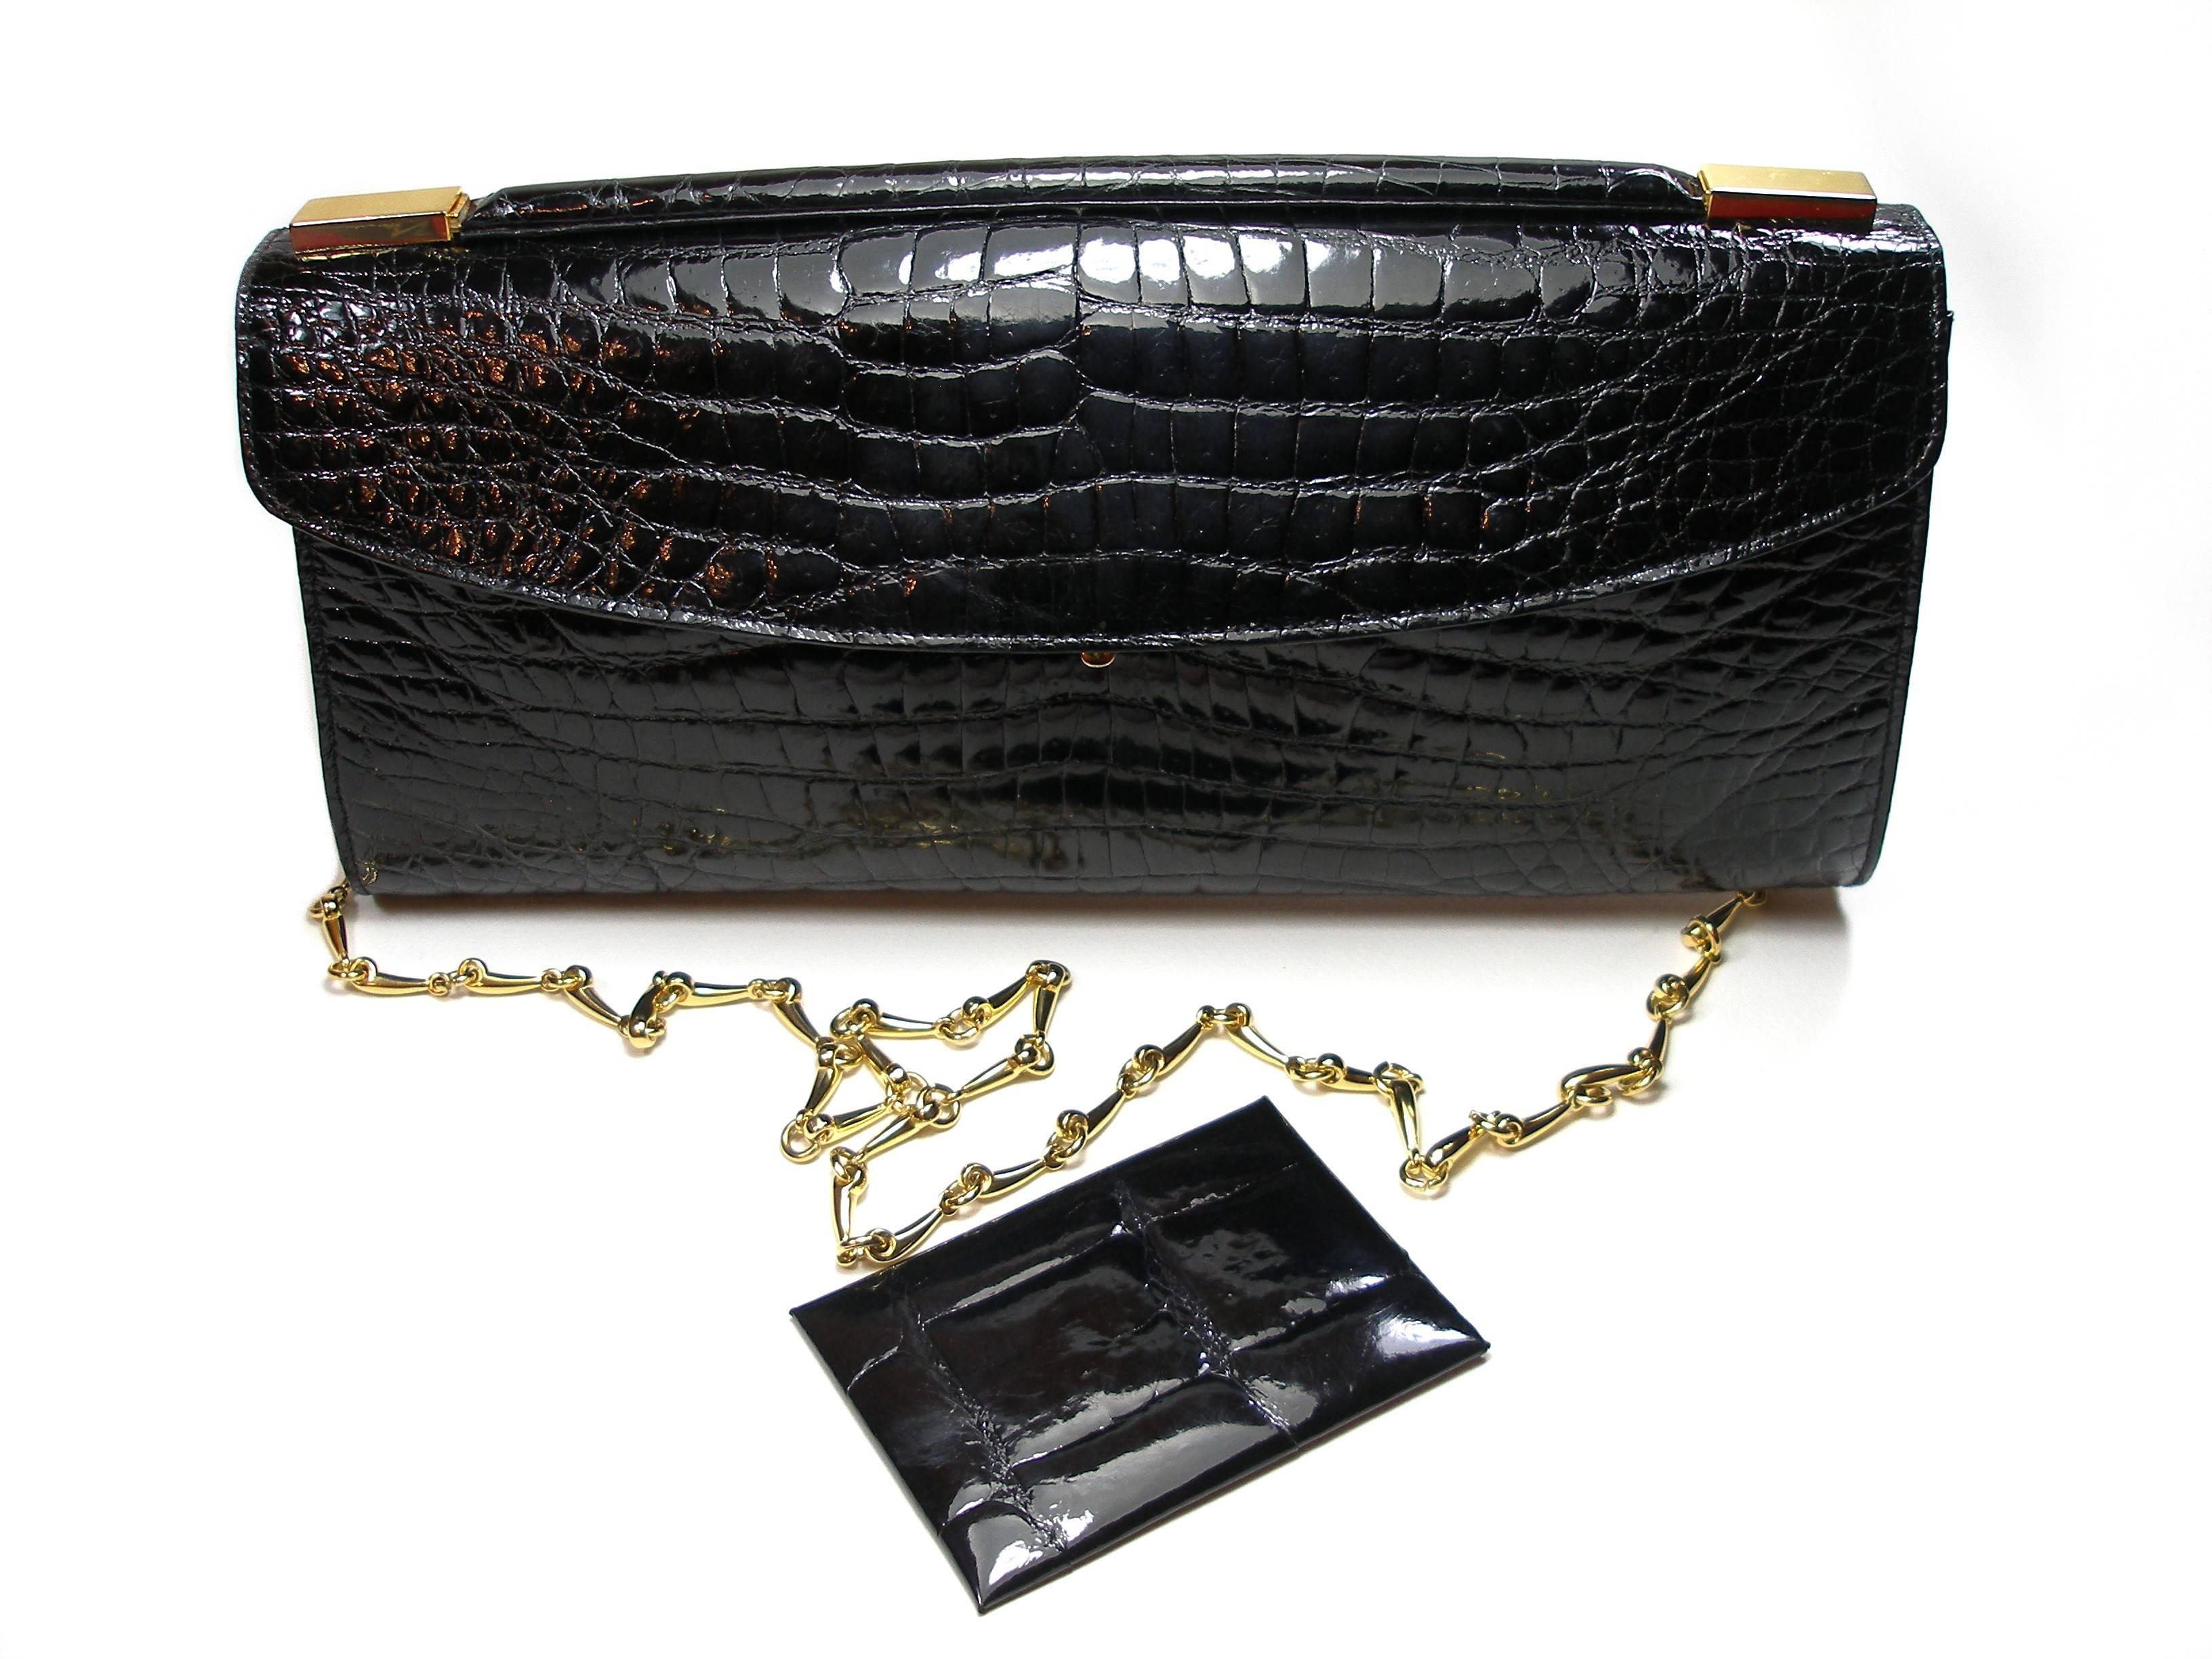 Nice and Perfect compagnon !
Delvaux Clutch or Evening Bag
And small Pocket Miroir dimensions :  7 x 10 cm or 2.75 x 3.9 inches
Crocodile Leather 
Amovible chaine strap 
Dimensions :  31 x 14 x 4 cm or 12.2 x 5.5 x 1.57 inches
Strap : 103 cm or